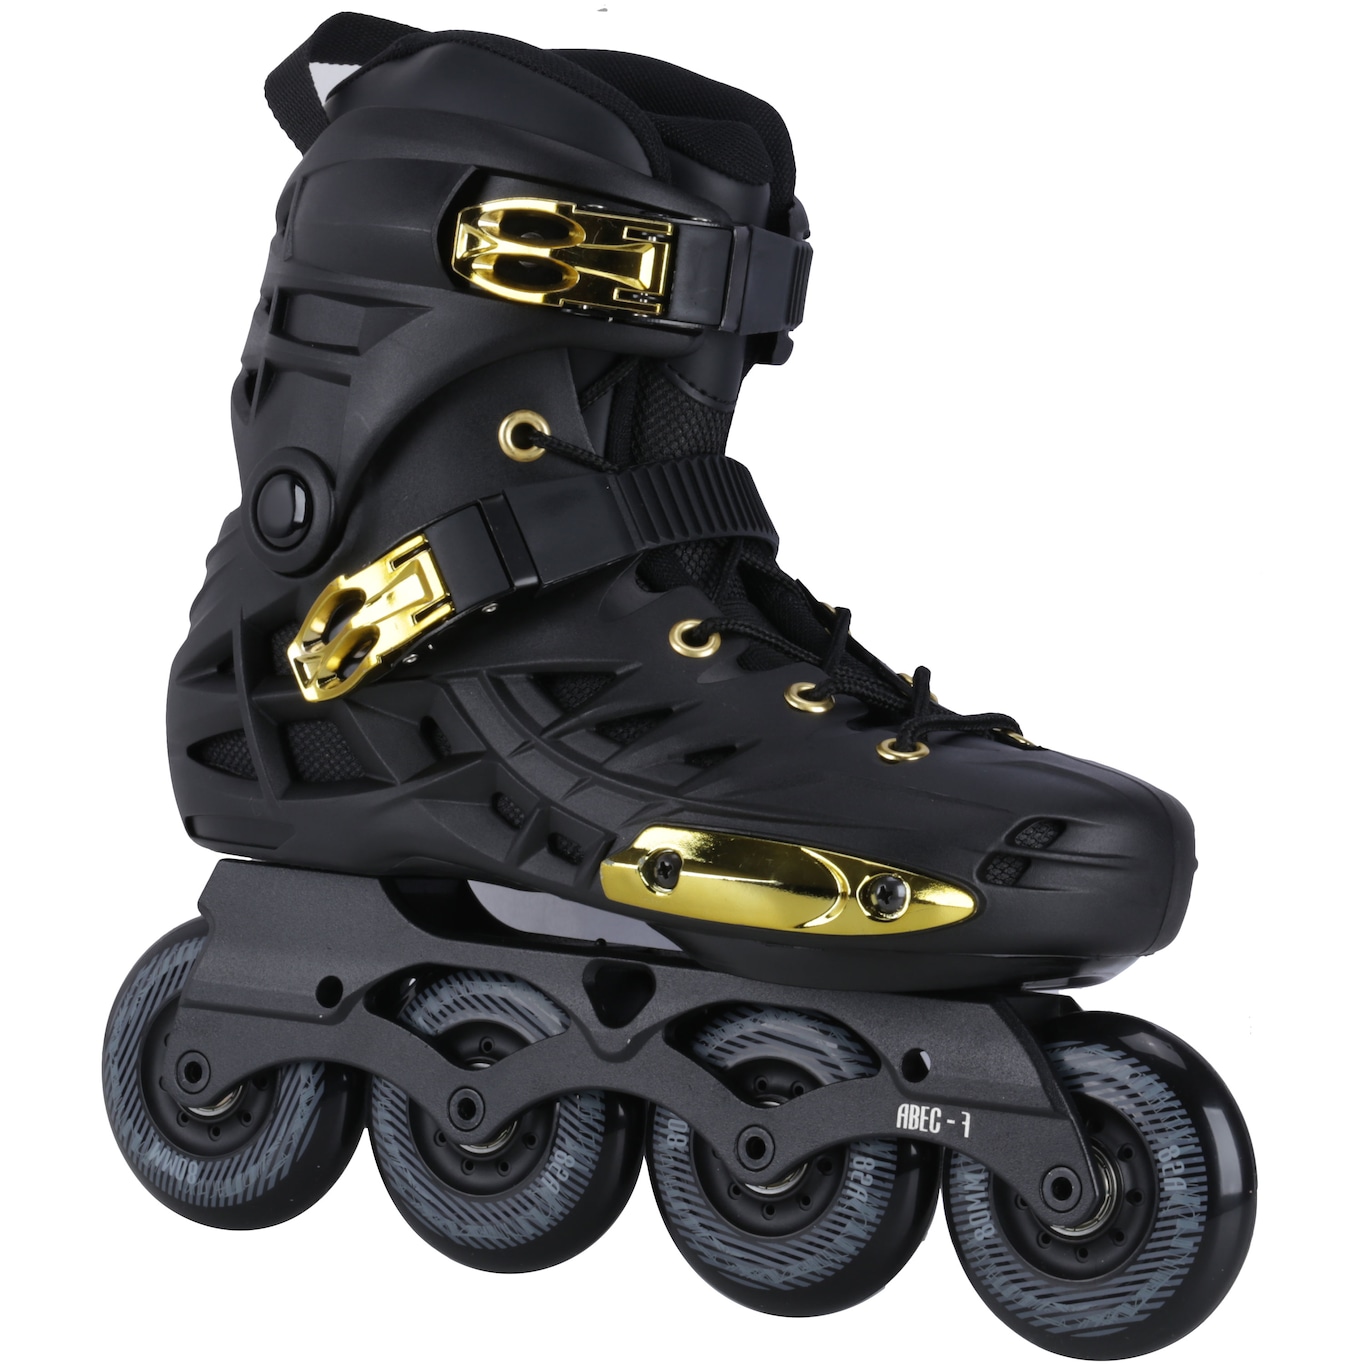 Patins Oxer Darkness Gold - In Line - Freestyle - ABEC 7 - Base de Alumínio - Adulto - Foto 1